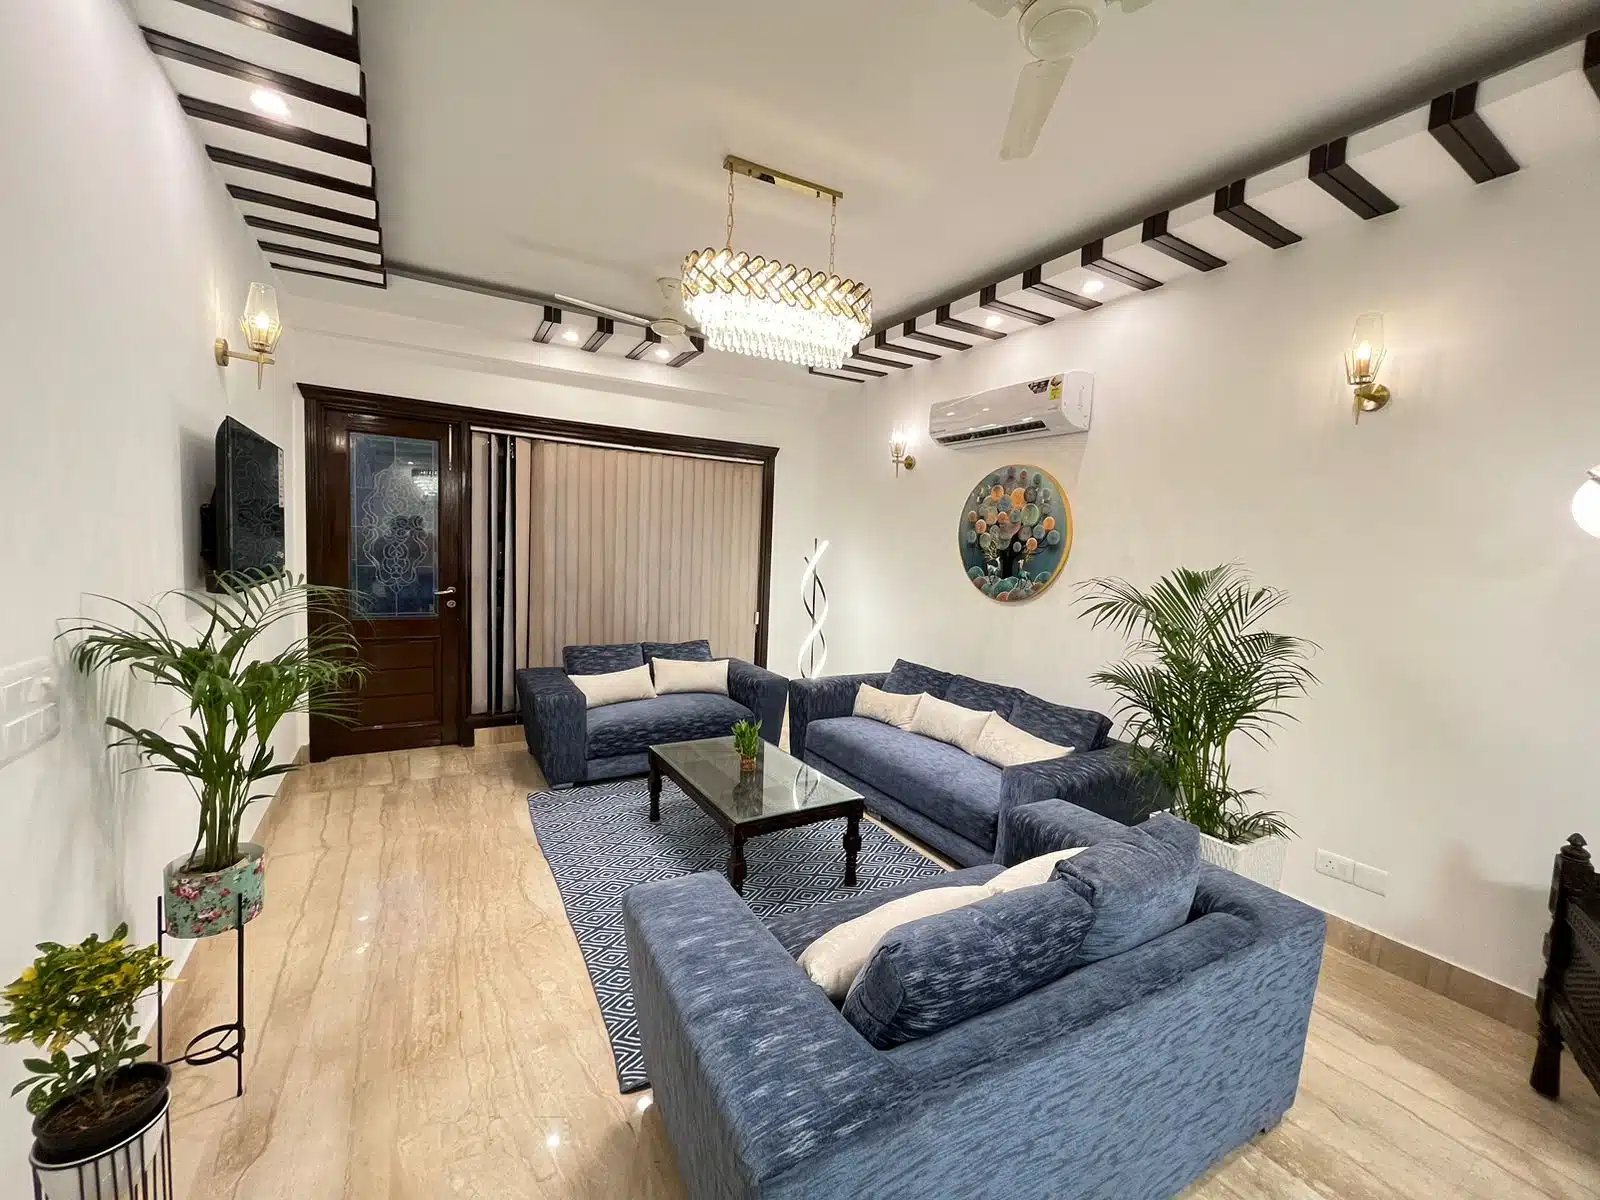 Side view of living room of 3 BHK Bedchambers Service Apartment SOuth Extension